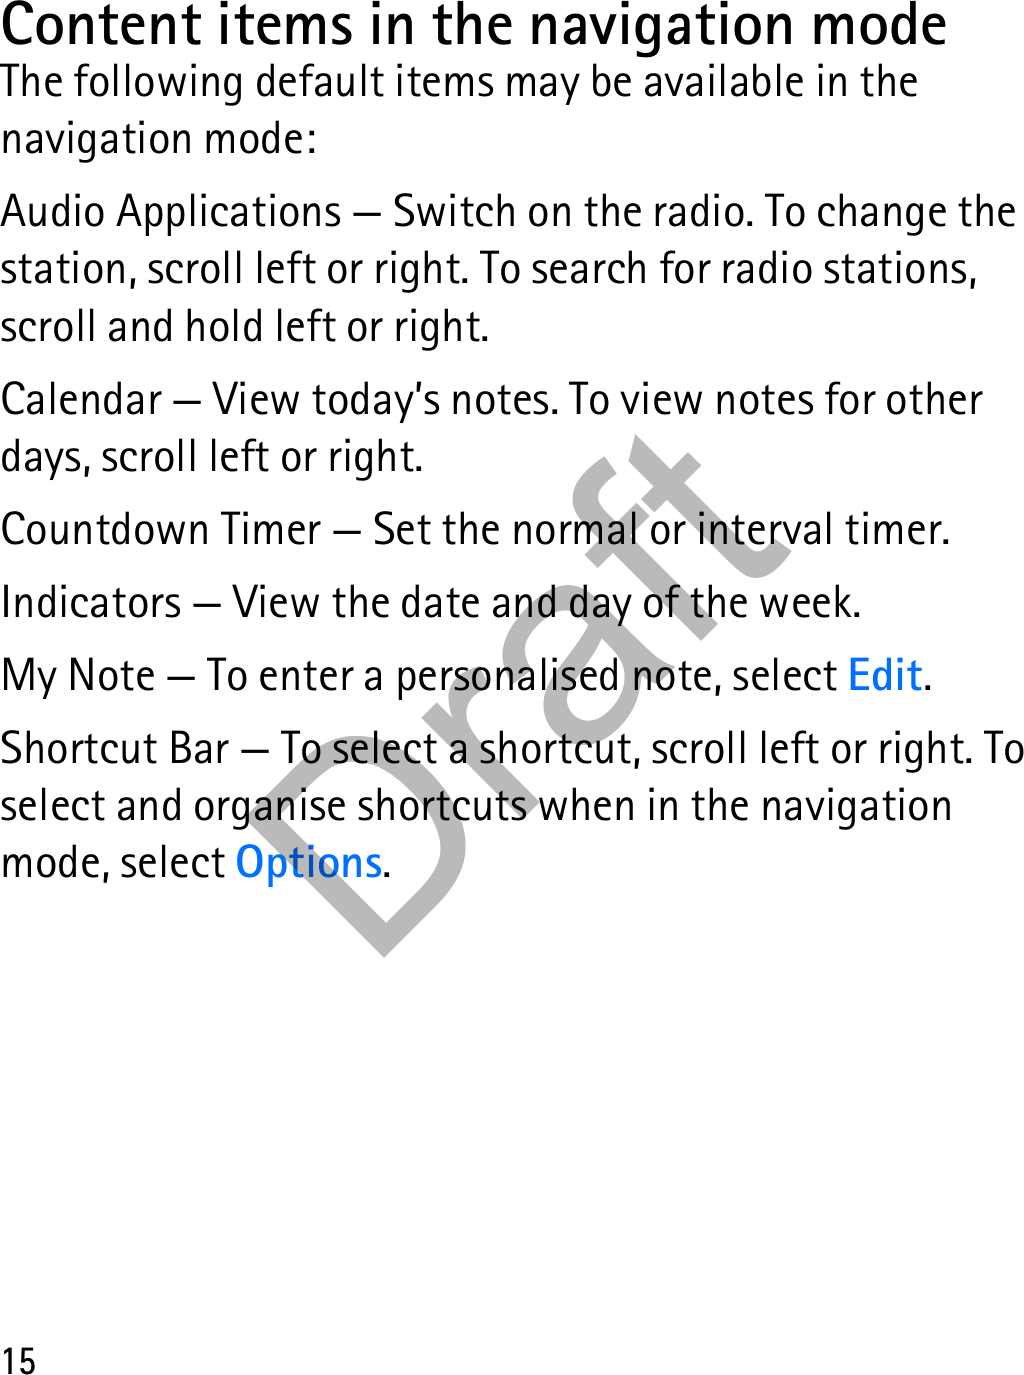 15Content items in the navigation modeThe following default items may be available in the navigation mode:Audio Applications — Switch on the radio. To change the station, scroll left or right. To search for radio stations, scroll and hold left or right.Calendar — View today’s notes. To view notes for other days, scroll left or right.Countdown Timer — Set the normal or interval timer.Indicators — View the date and day of the week.My Note — To enter a personalised note, select Edit.Shortcut Bar — To select a shortcut, scroll left or right. To select and organise shortcuts when in the navigation mode, select Options.Draft